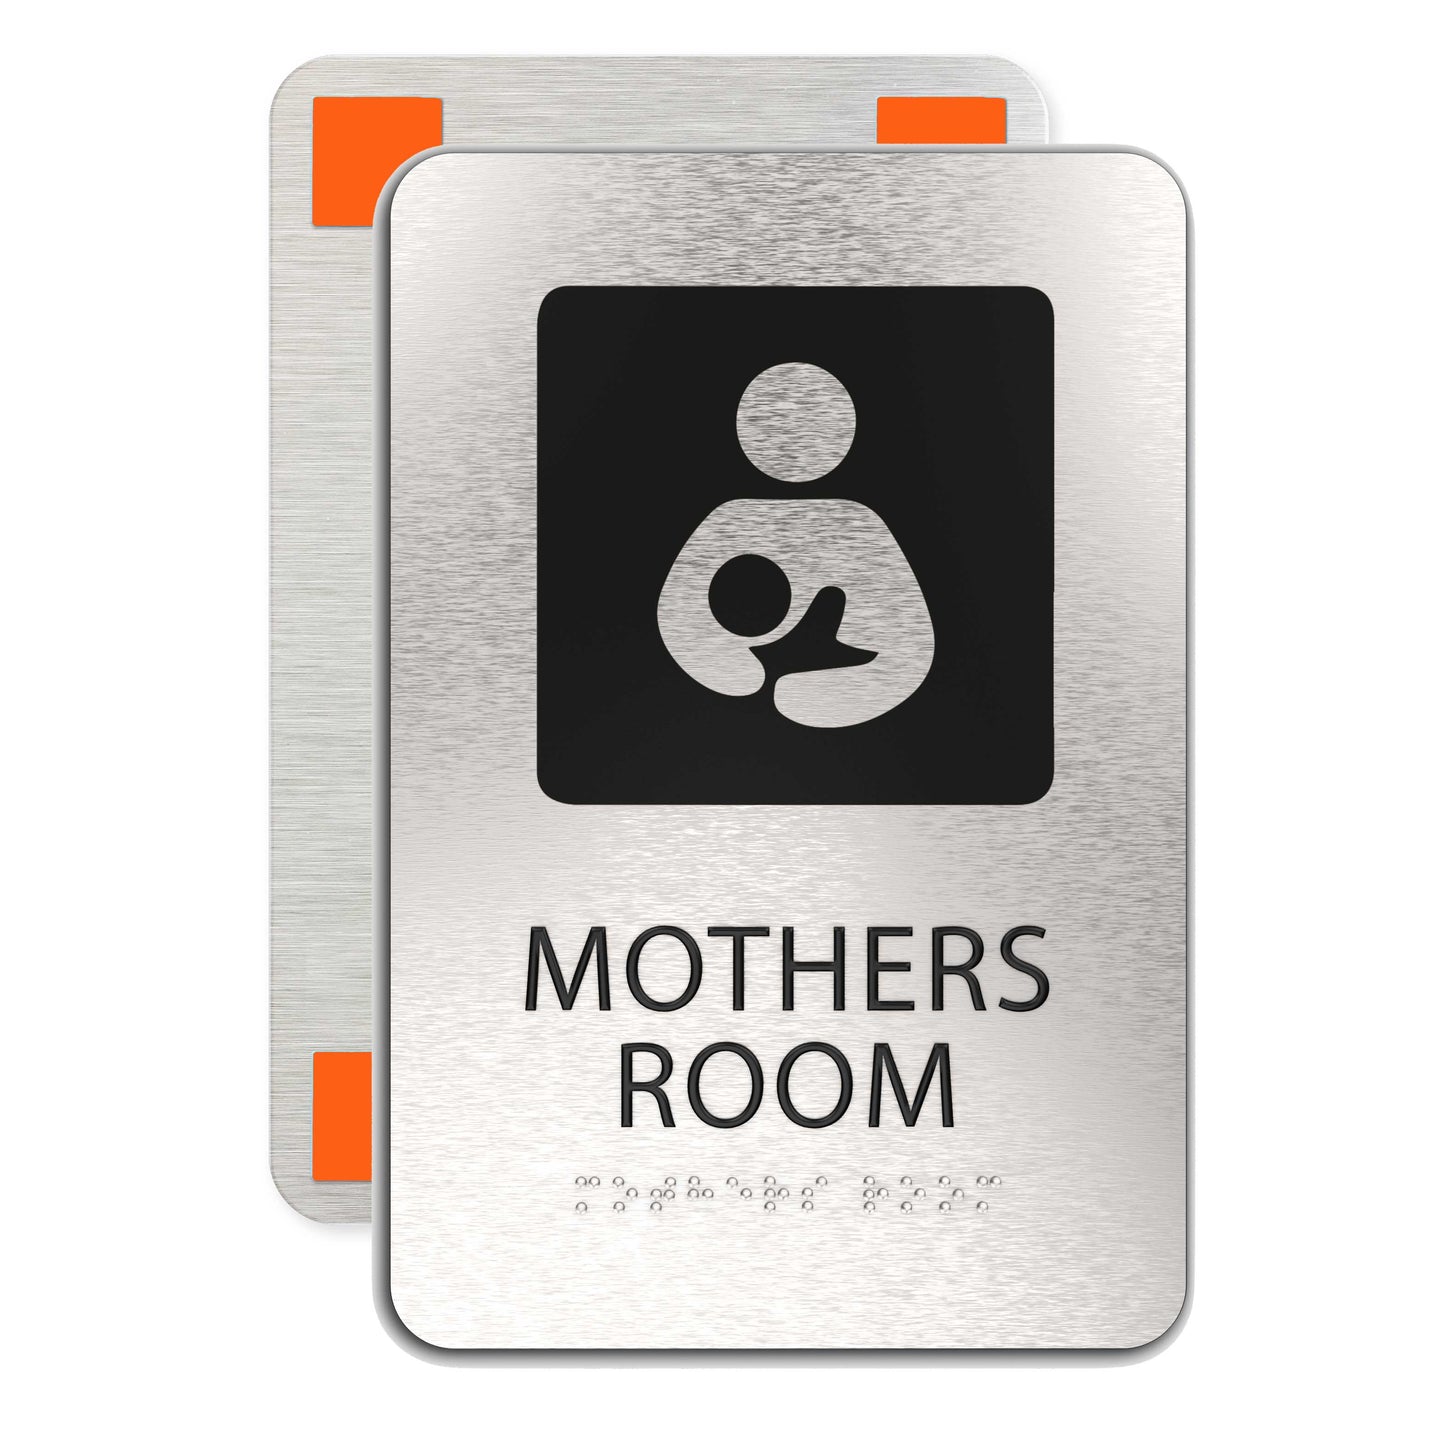 MOTHERS ROOM Nursing Sign, ADA Compliant, Breastfeeding Symbol, Brushed Silver, Raised Black Text, Non-Tactile Pictograms, Grade 2 Braille, 6"x9"